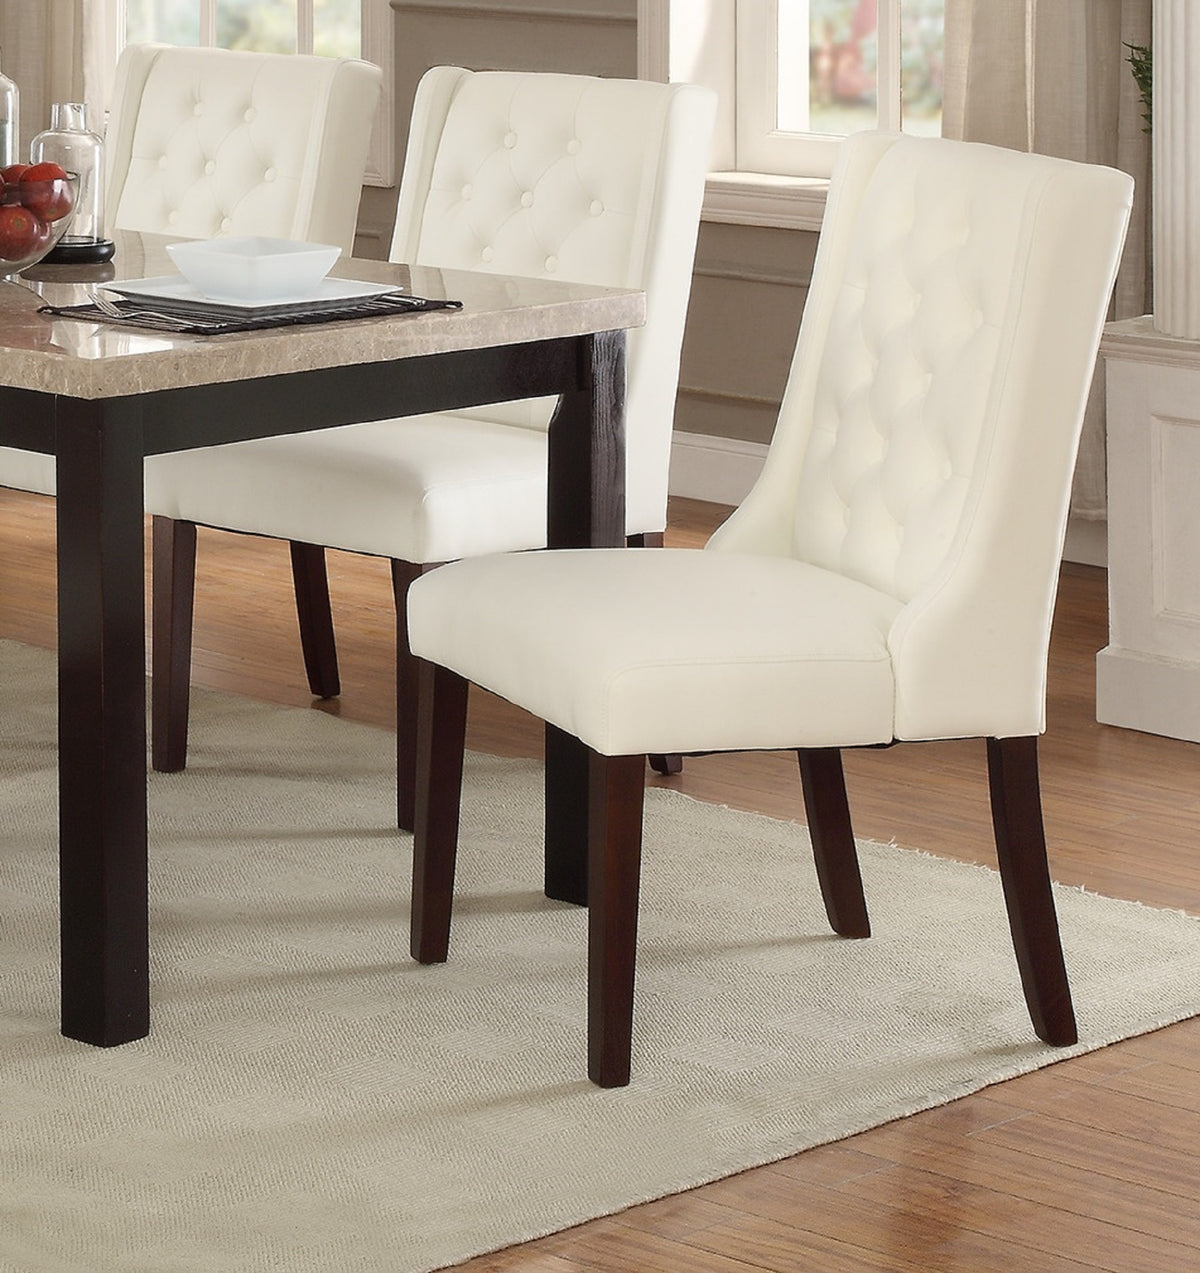 Modern Faux Leather White Tufted Dining Seat Chair (Set of 2) - White